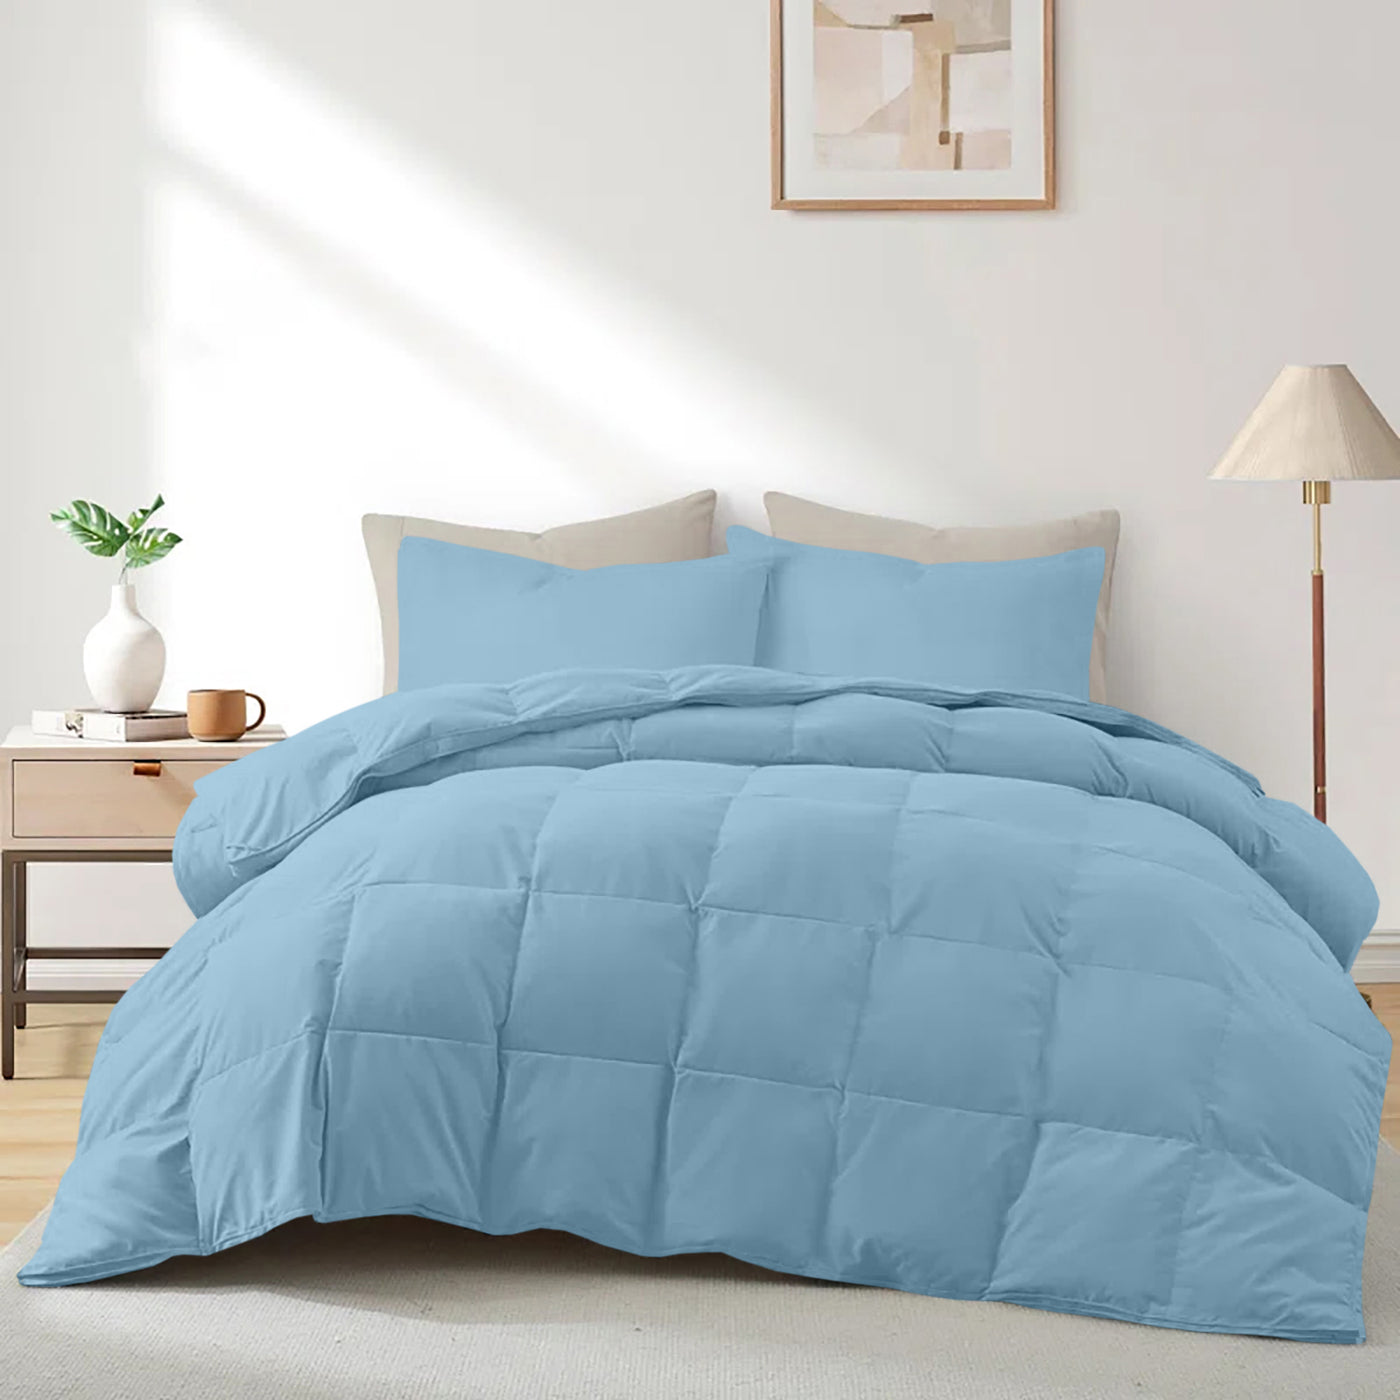 Down Alternative Quilt With Microfiber Fill & 300 TC Egyptian Cotton Exterior - Sky Blue